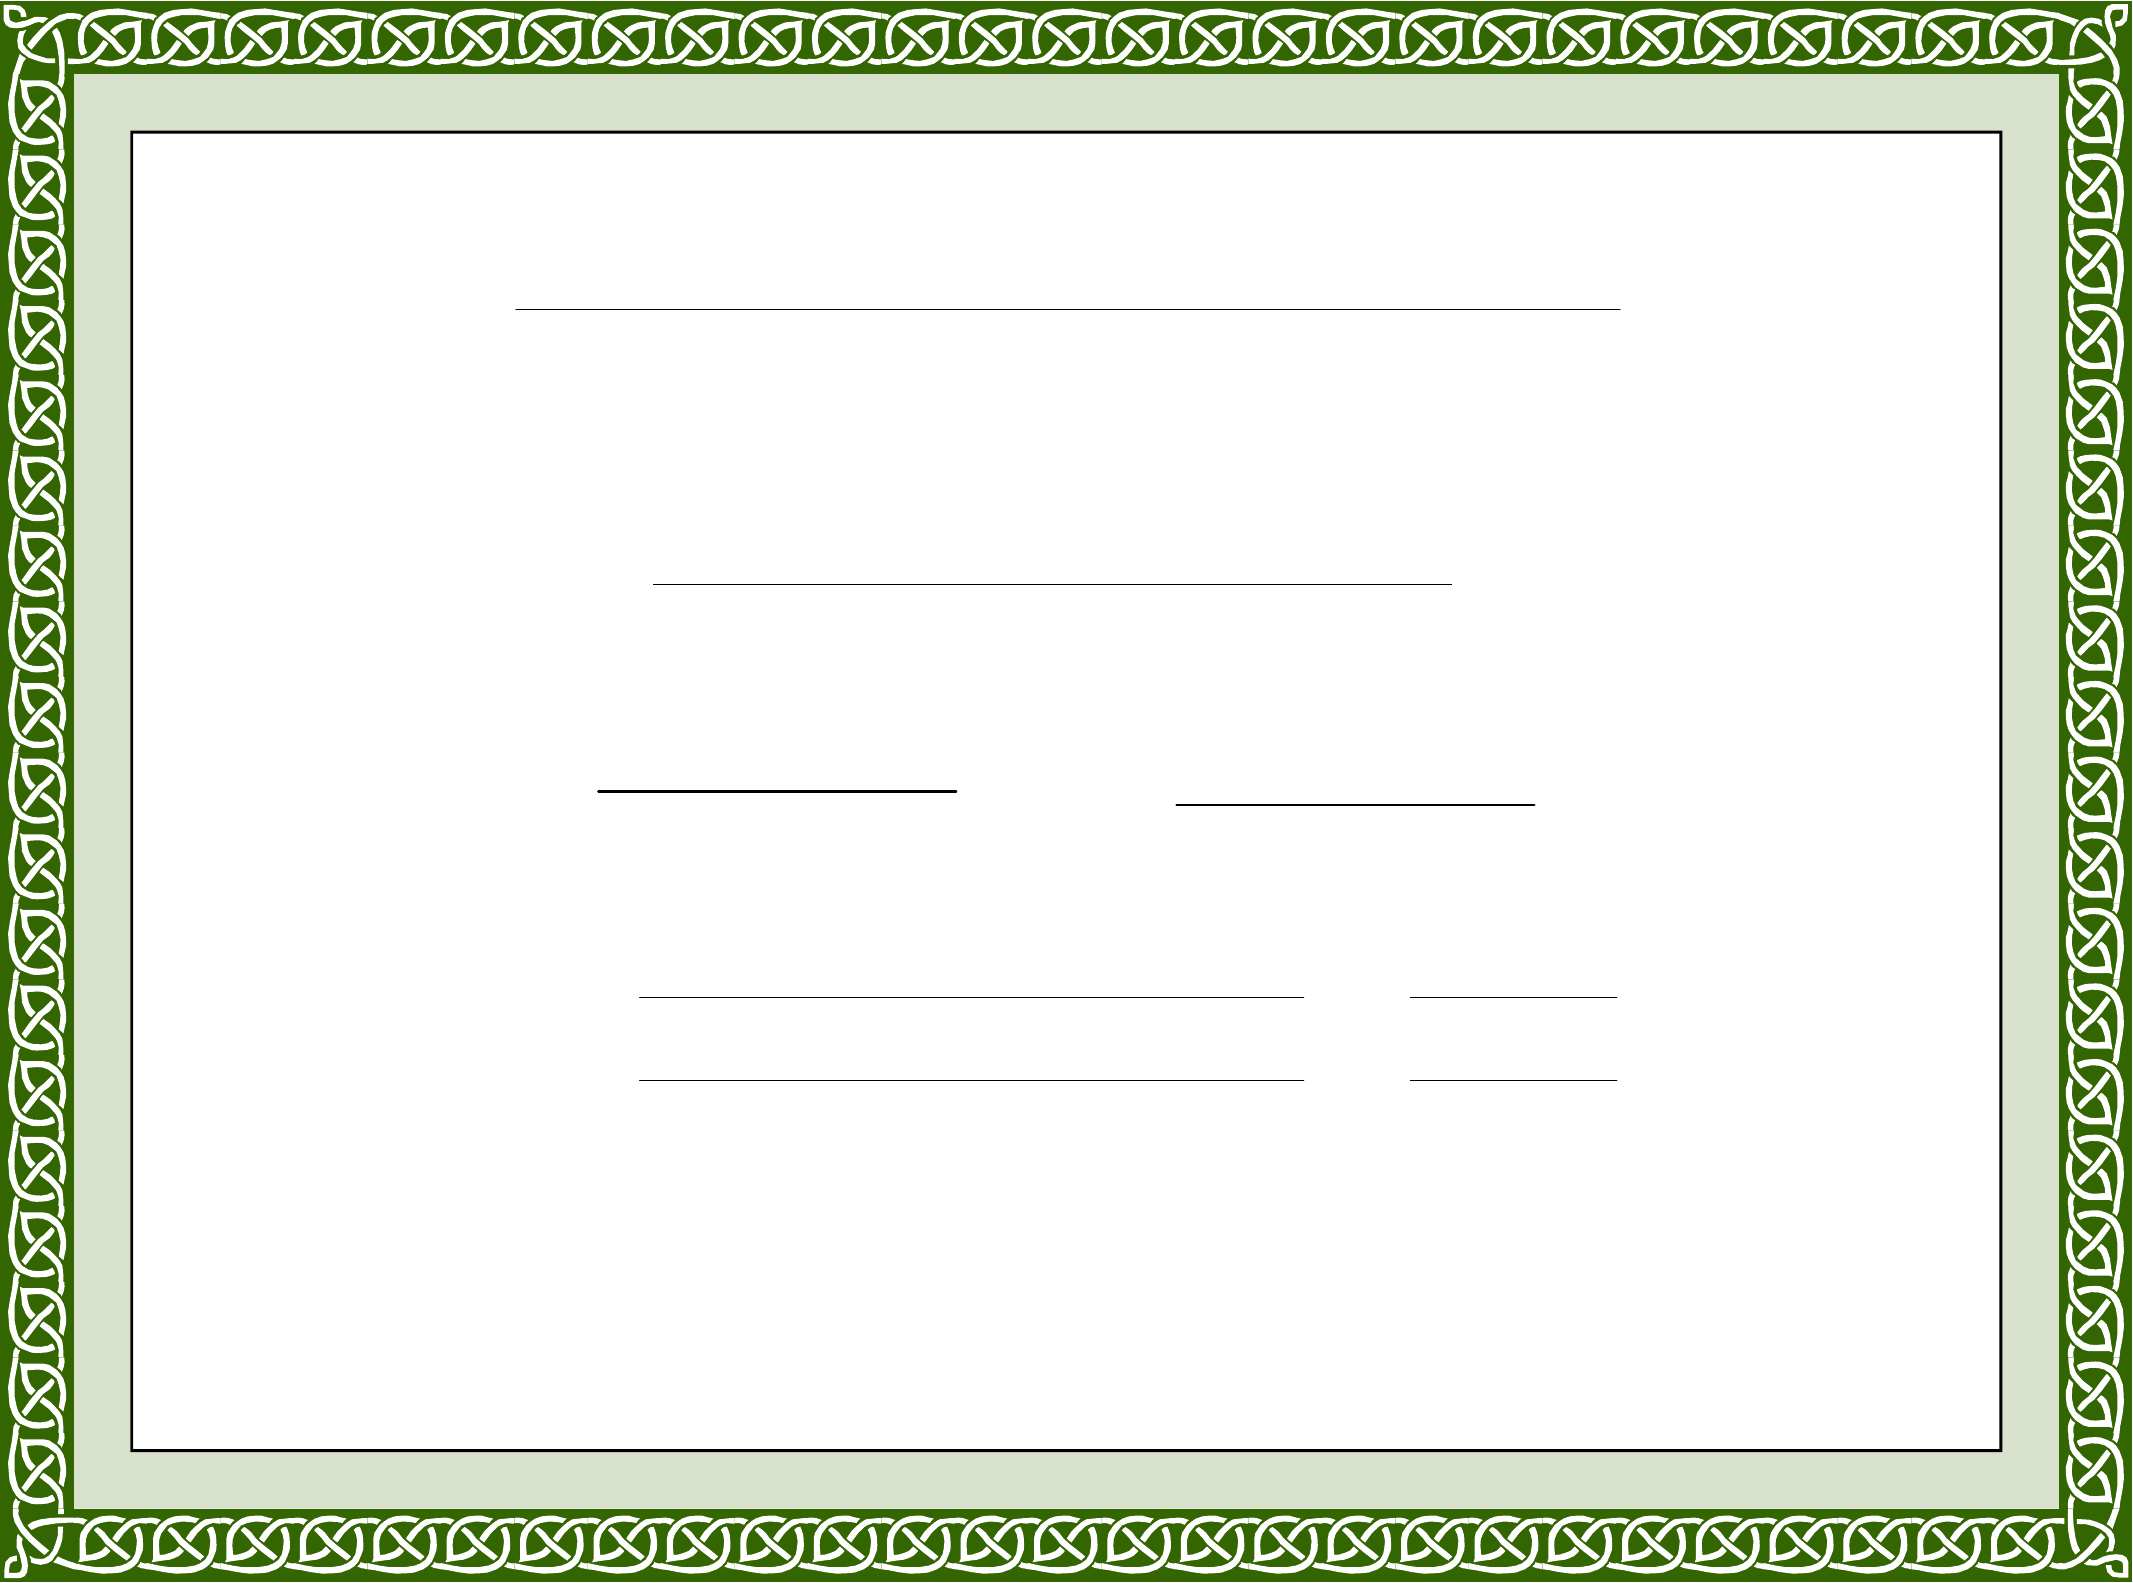 Sample Training Completion Certificate Template Free Download Intended For Blank Certificate Templates Free Download